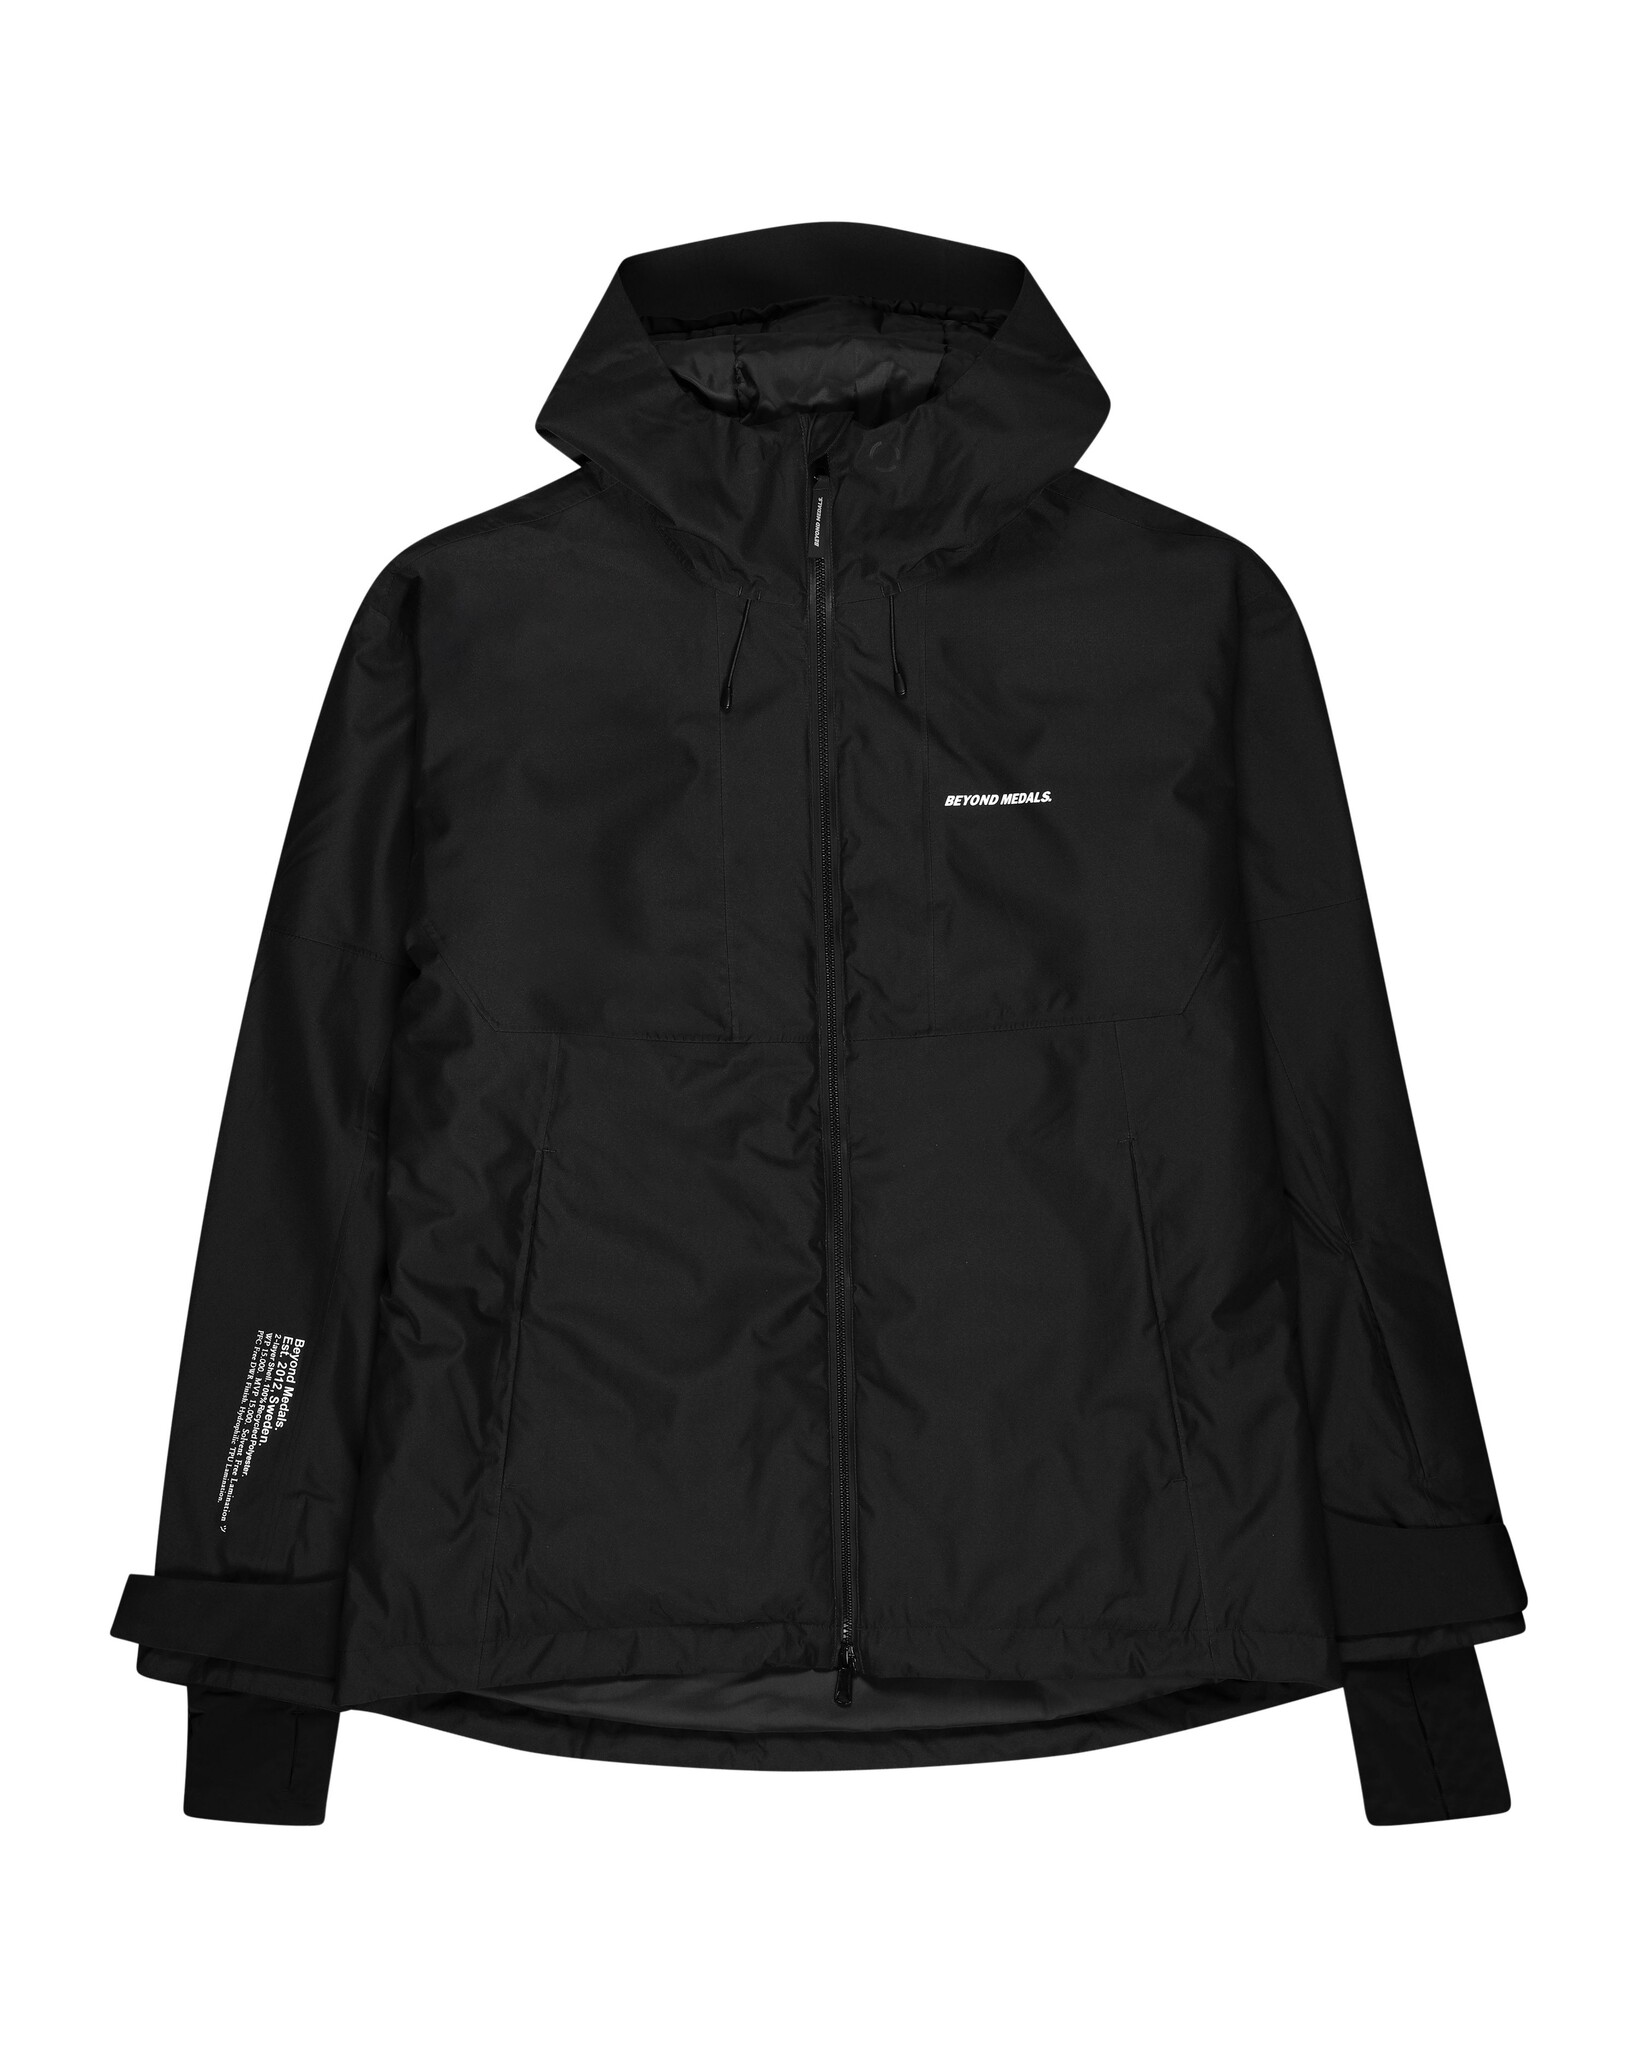 Beyond Medals Full Zip Jacket - Outtabounds